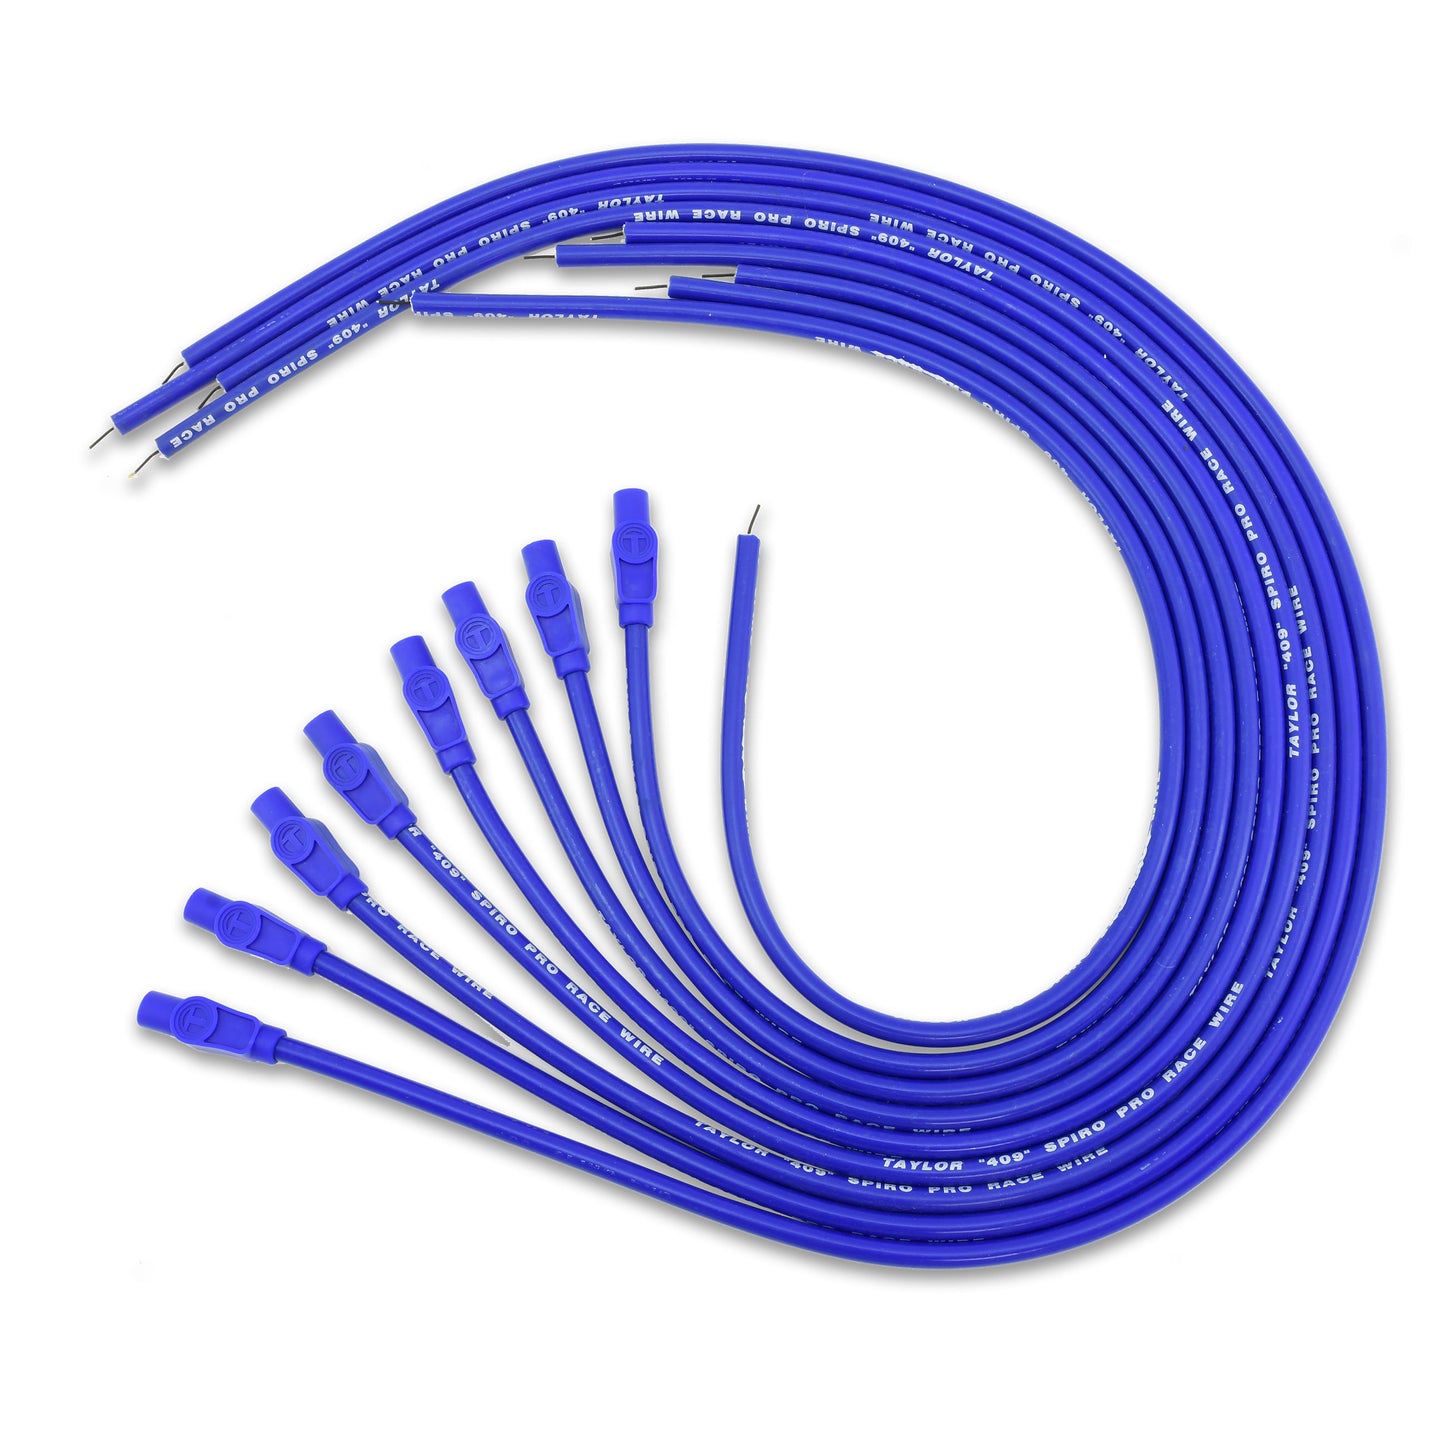 Taylor Cable 79655 10.4mm 409 Spiro-Pro Ignition Wires univ 8 cyl 180 blue